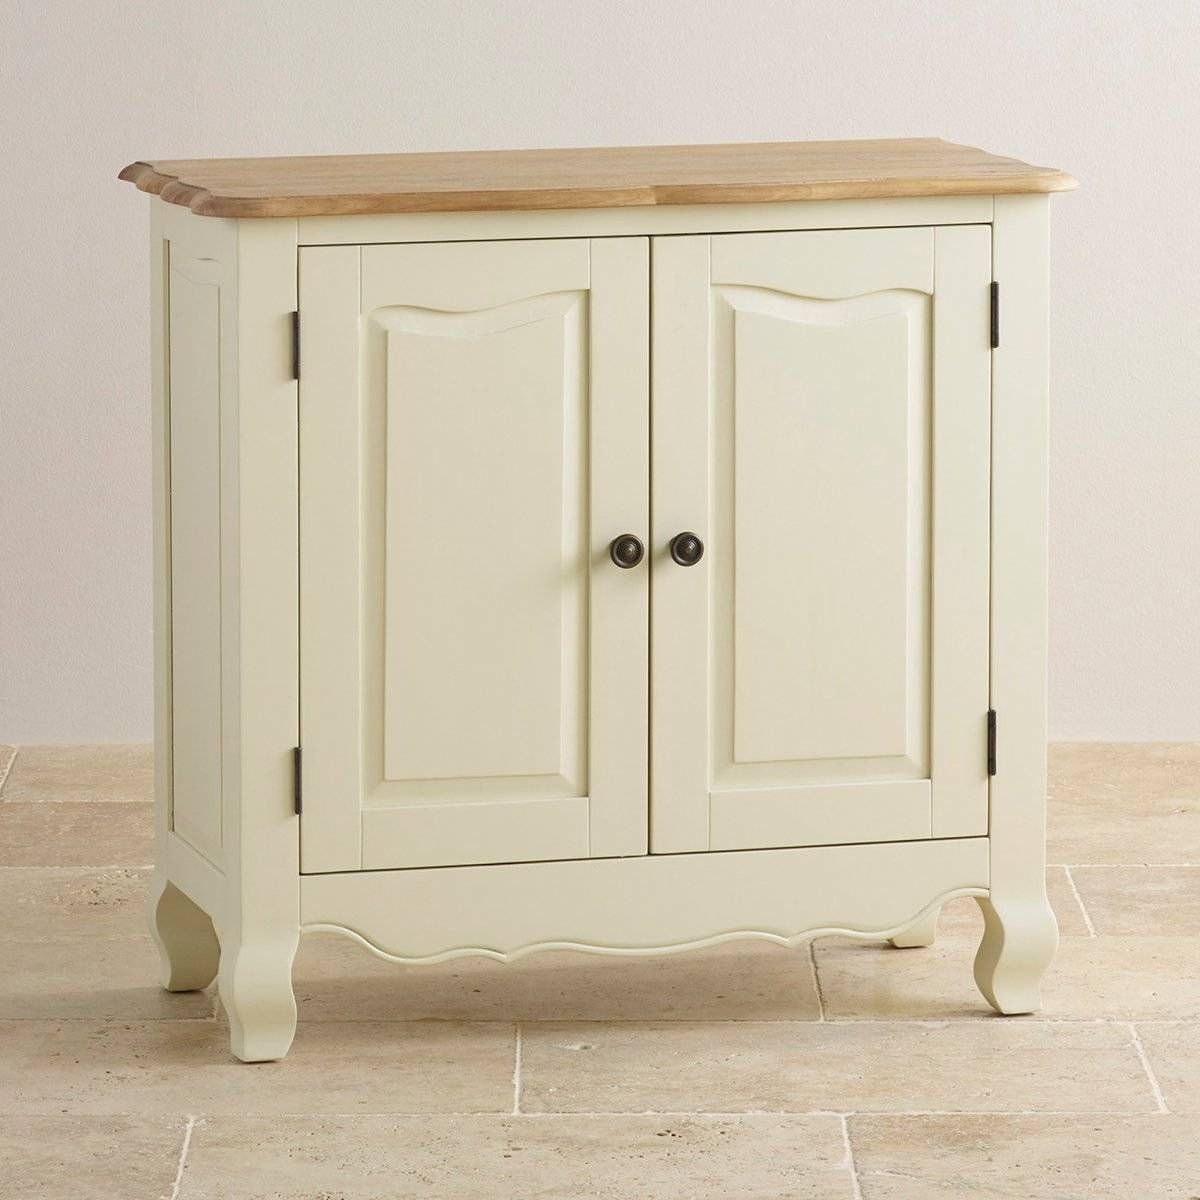 Bella Small Sideboard In Cream Painted Oak | Oak Furniture Land Within Cream Sideboards (View 15 of 15)